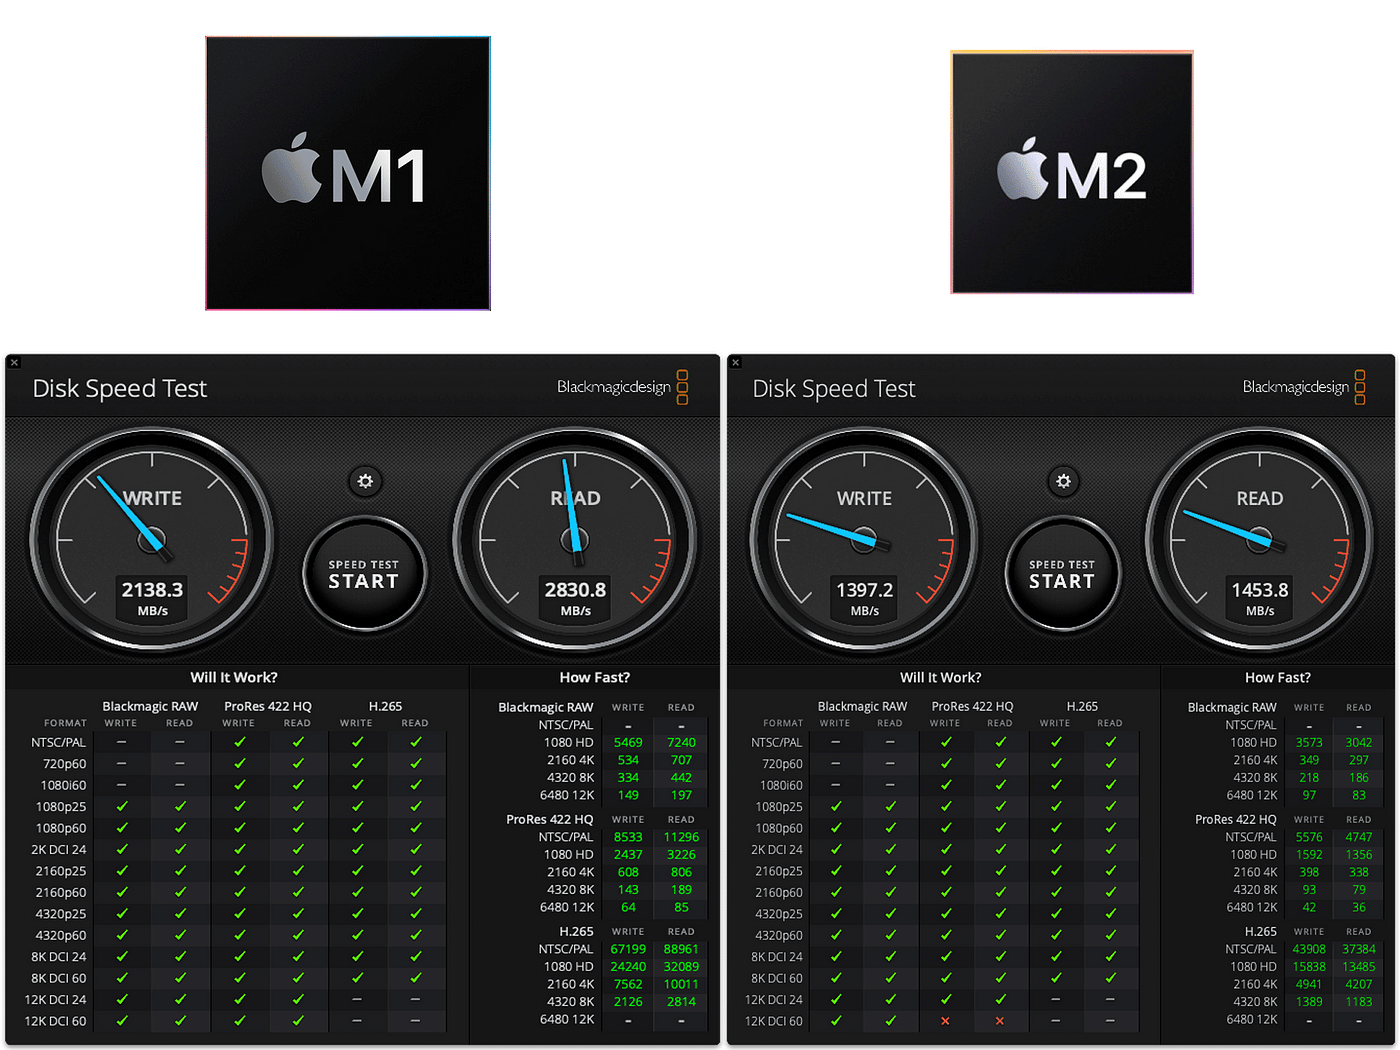 How Much Slower is the SSD in Basic M2 MacBook Air Compared to M1